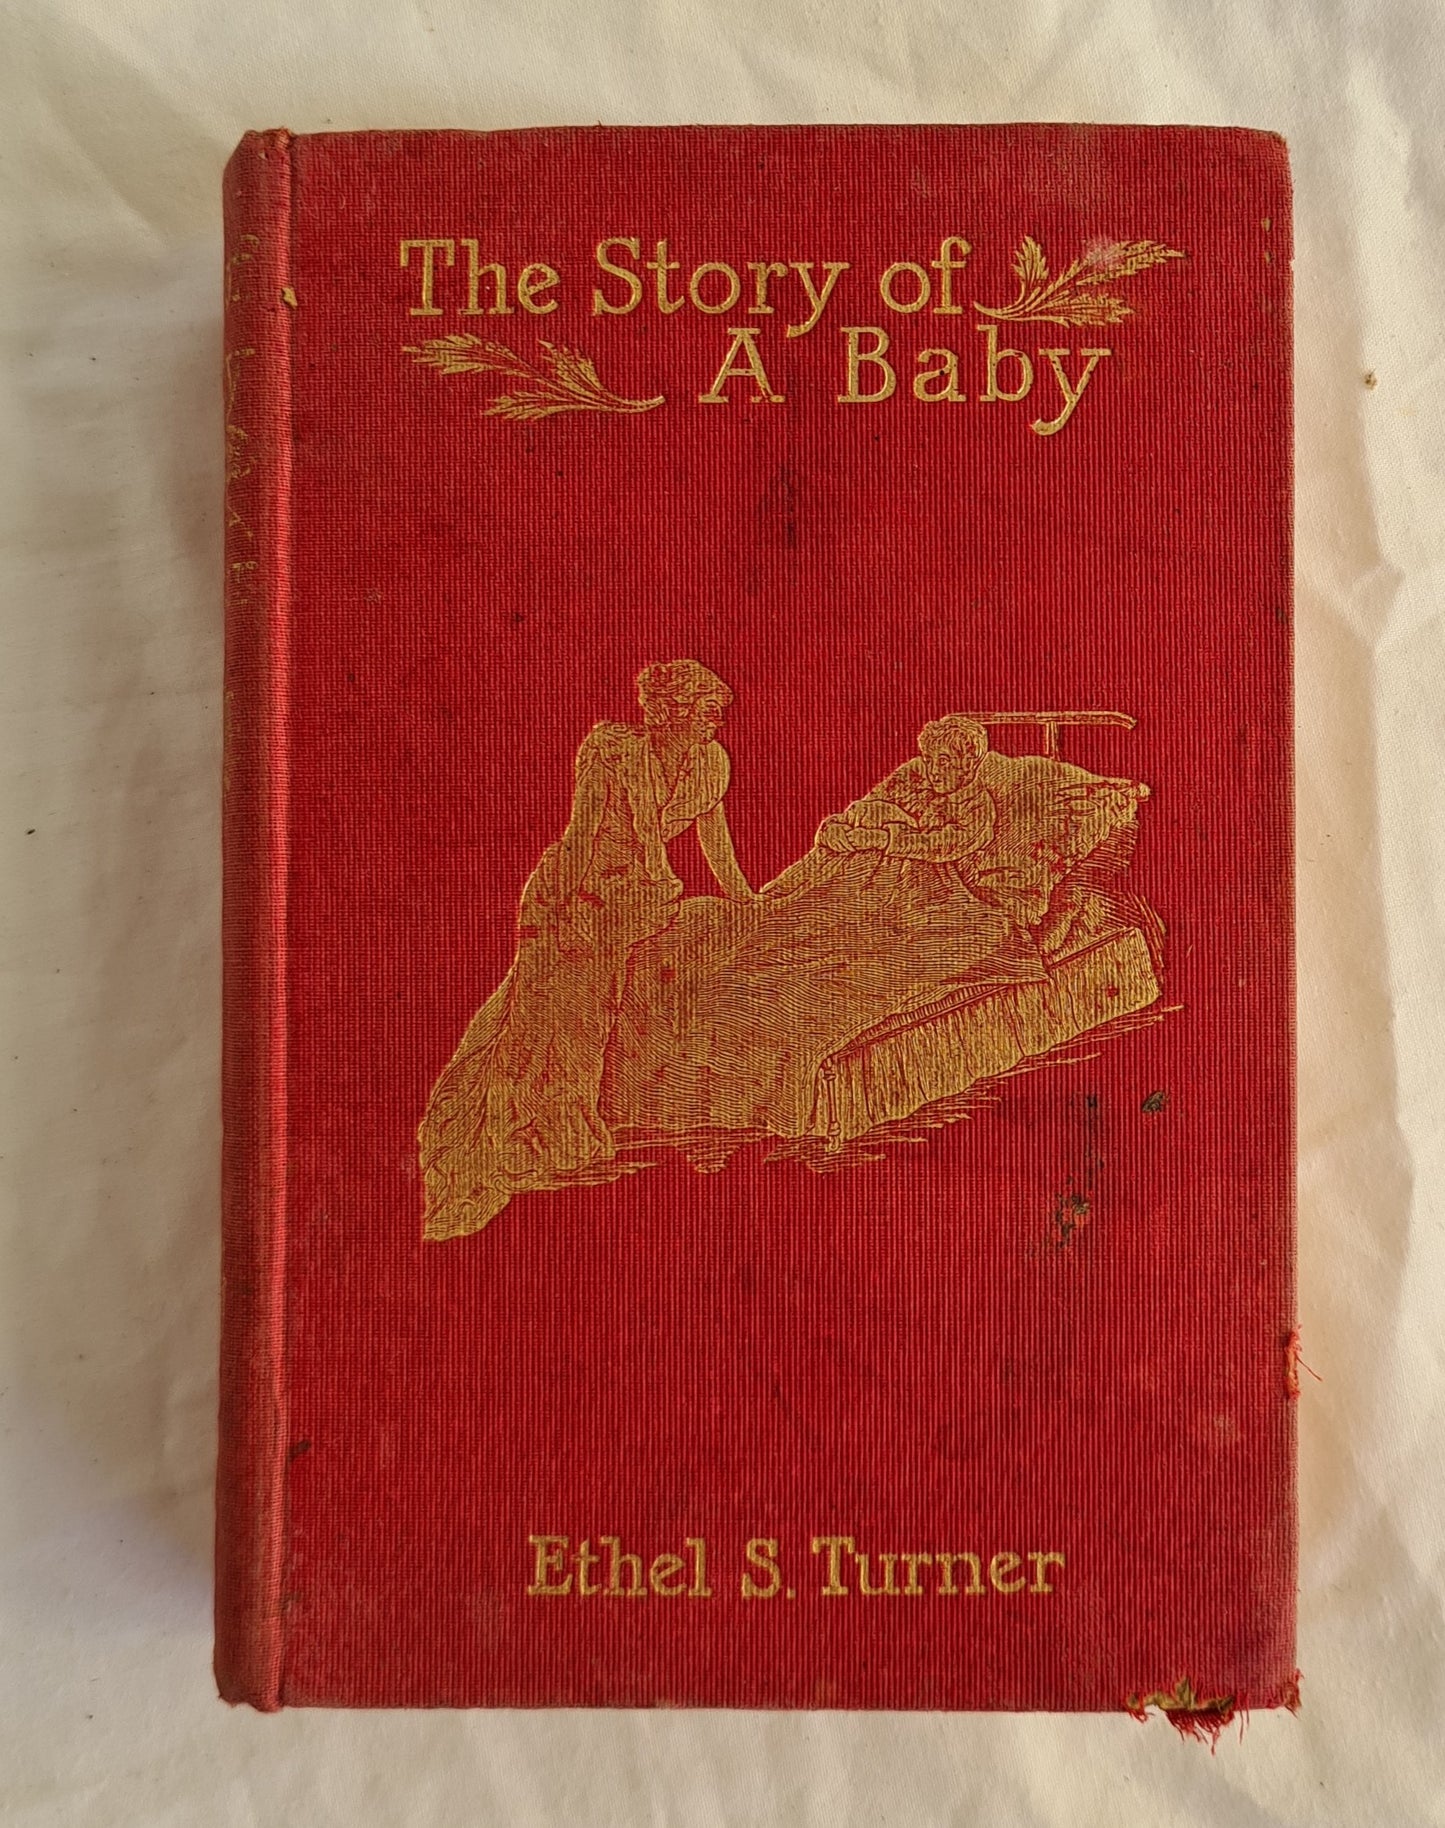 The Story of a Baby by Ethel Turner